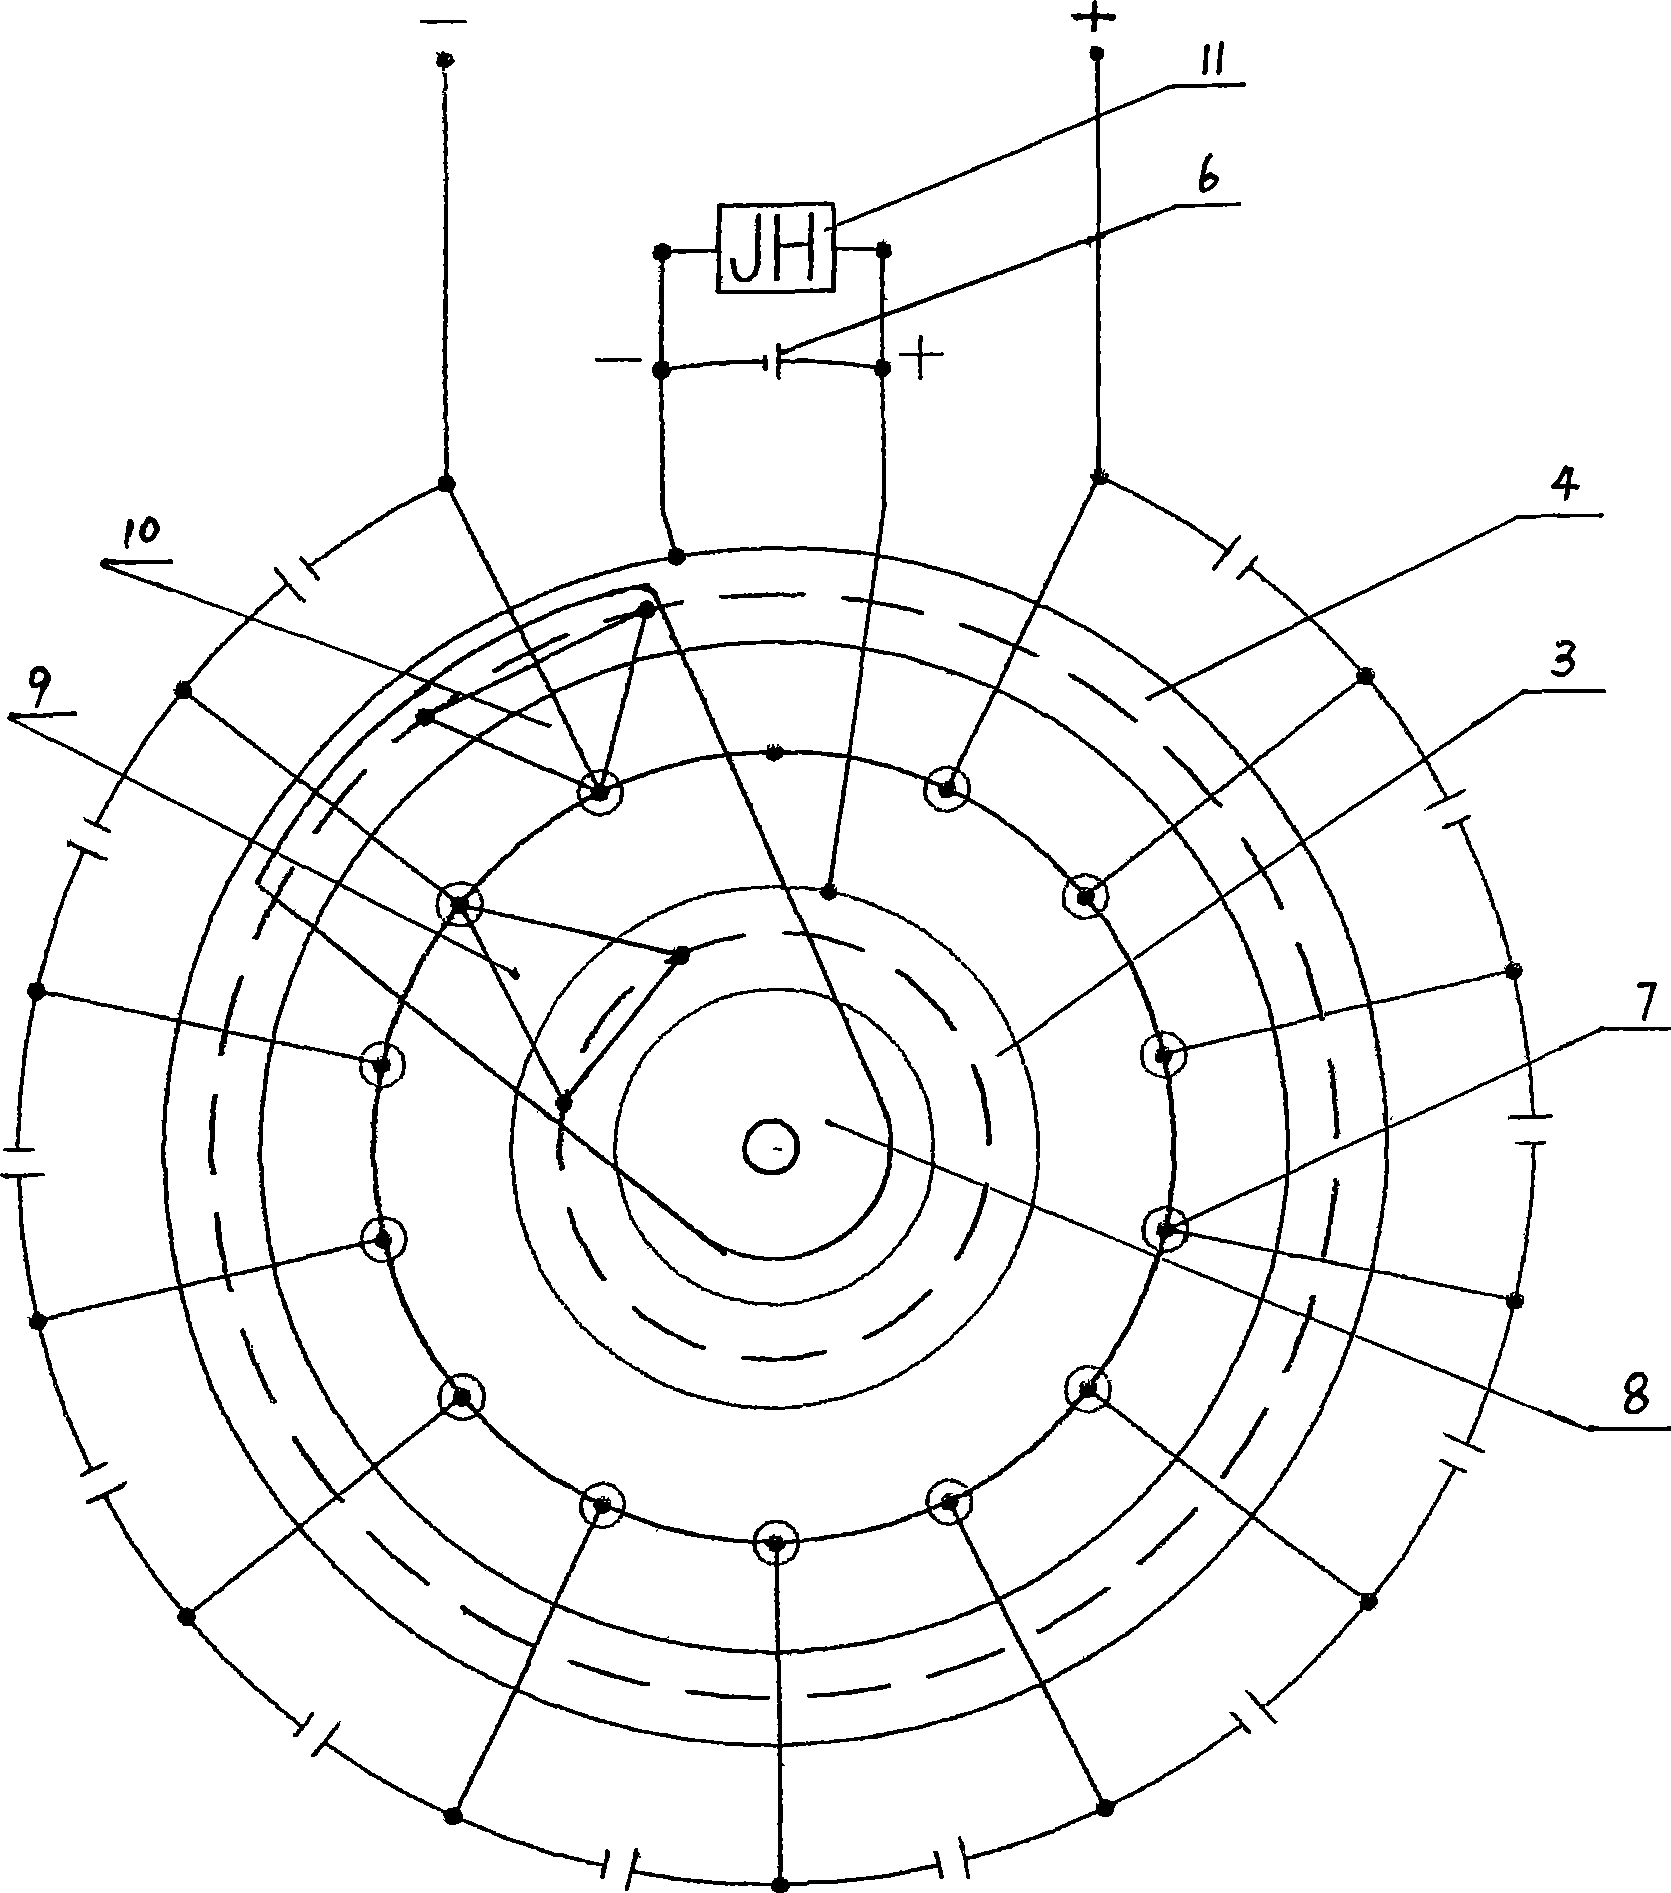 Charging and discharging balance device for lithium ion power battery group